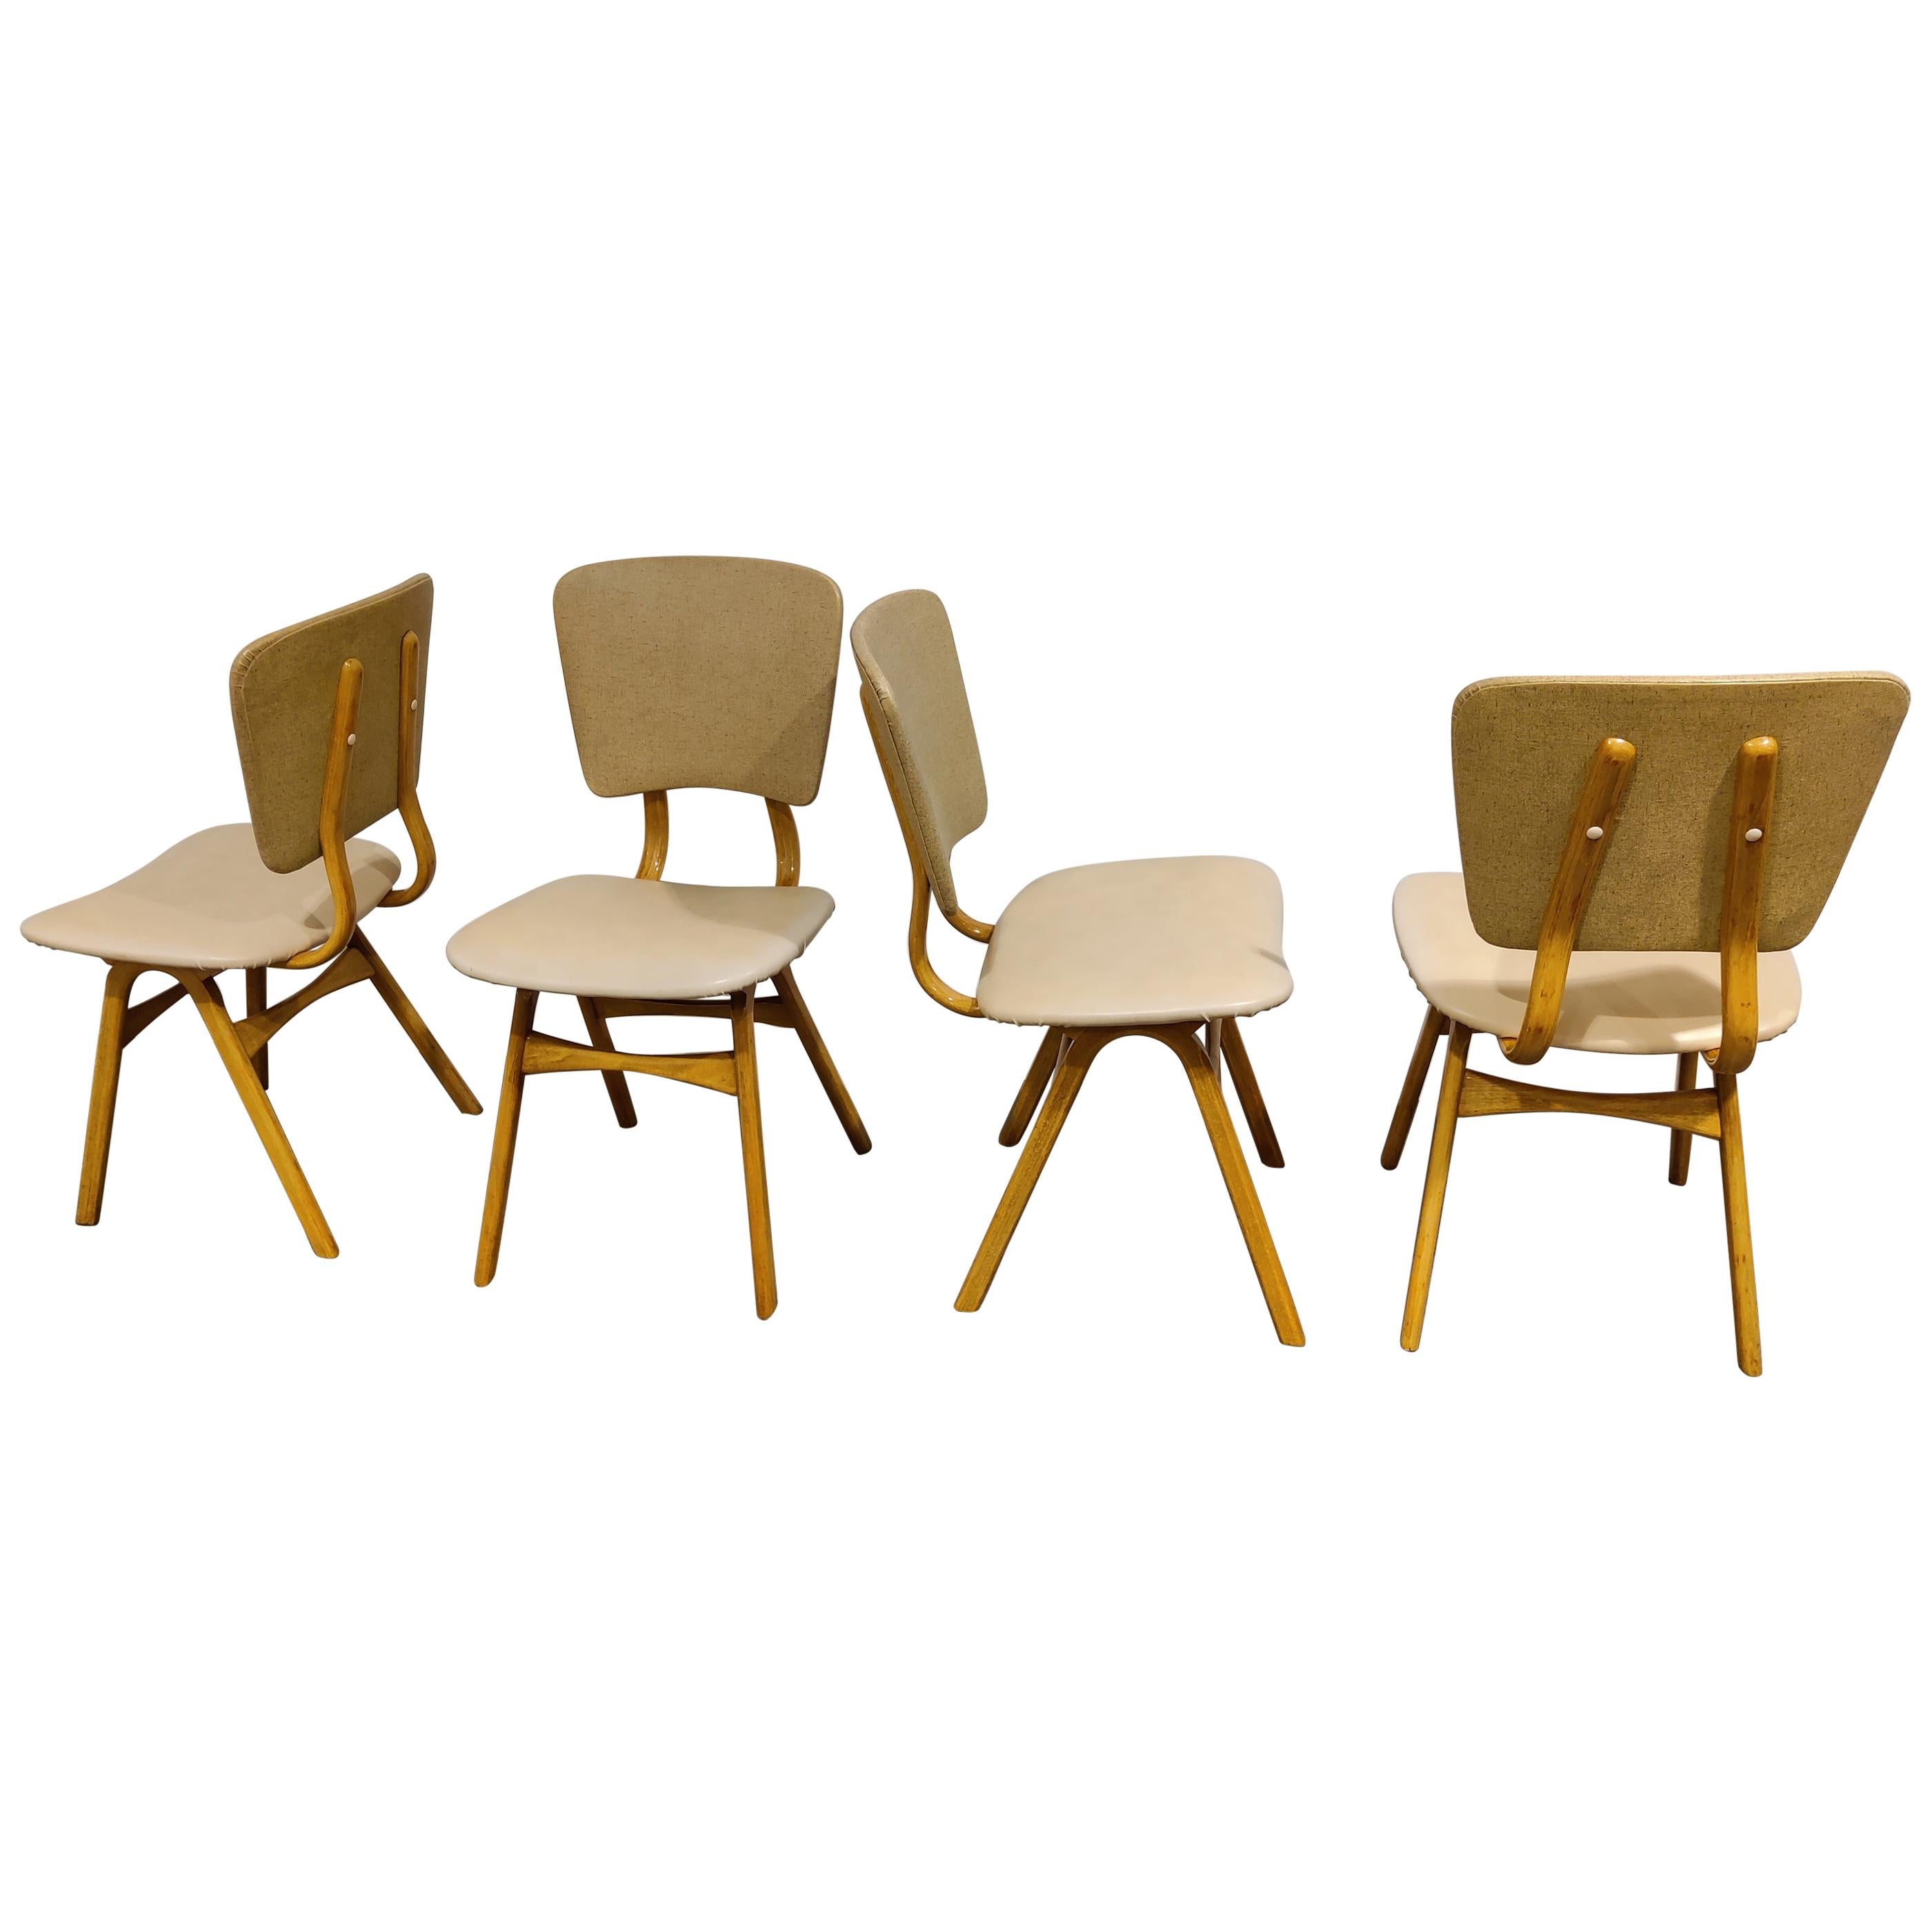 Set of 4 Vintage Scandinavian Dining Chairs, 1960s